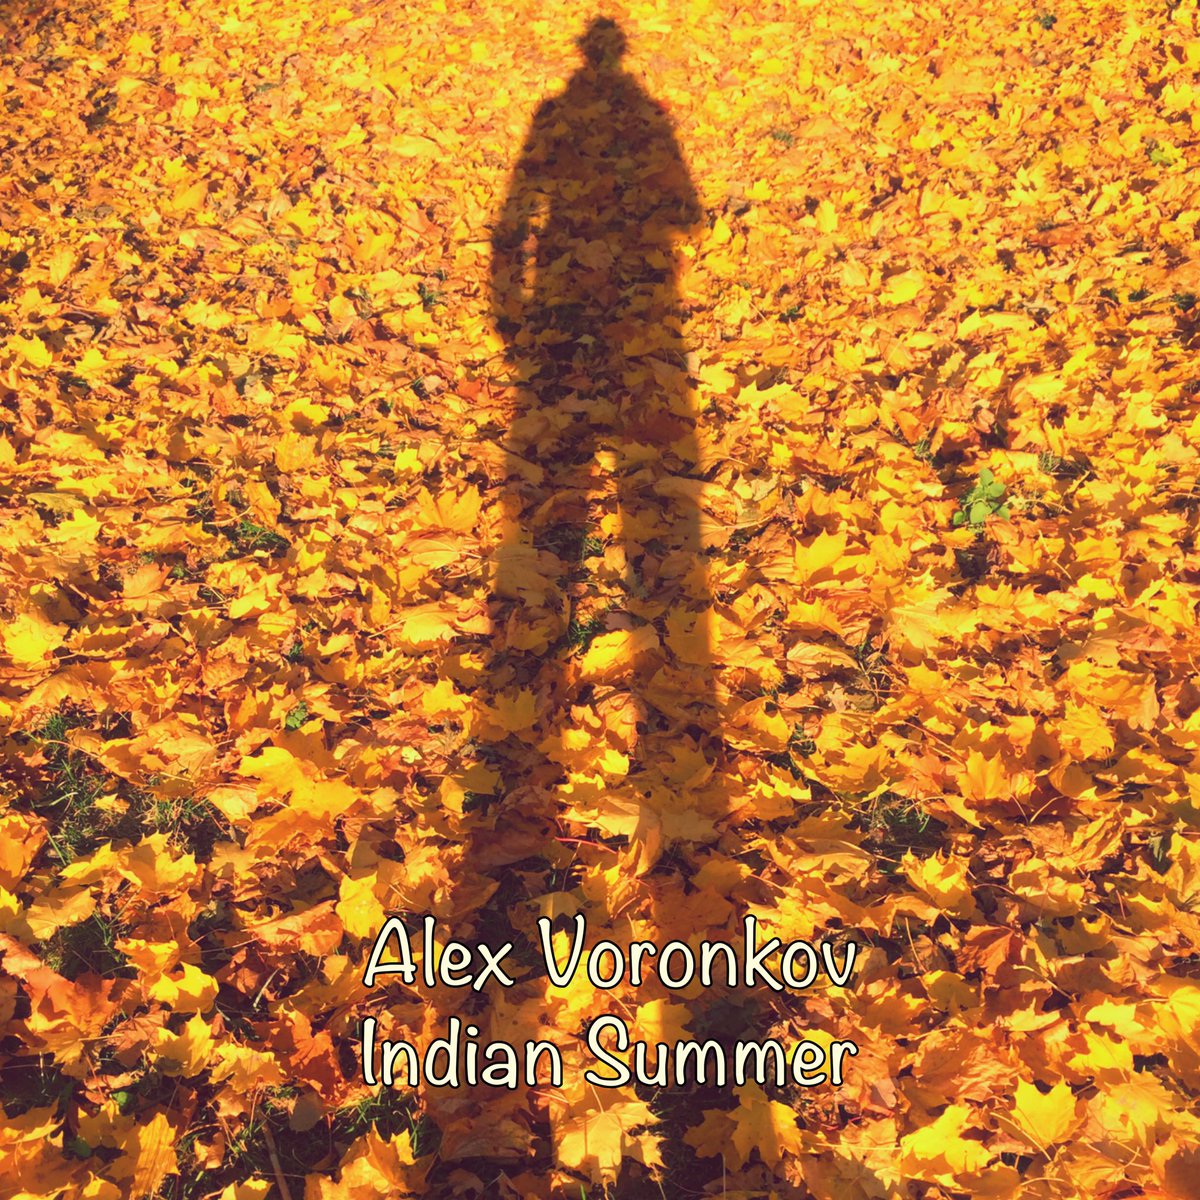 Hi to everyone! I hope you’re all enjoying your summer. I'm happy to announce that 9 August will release of my new single 'Indian Summer'! #alexvoronkov #meditativeacidjazz #independentmusic #acidjazz #jazzfunk #indiansummer #bass #newrelease #jazzradio #piano